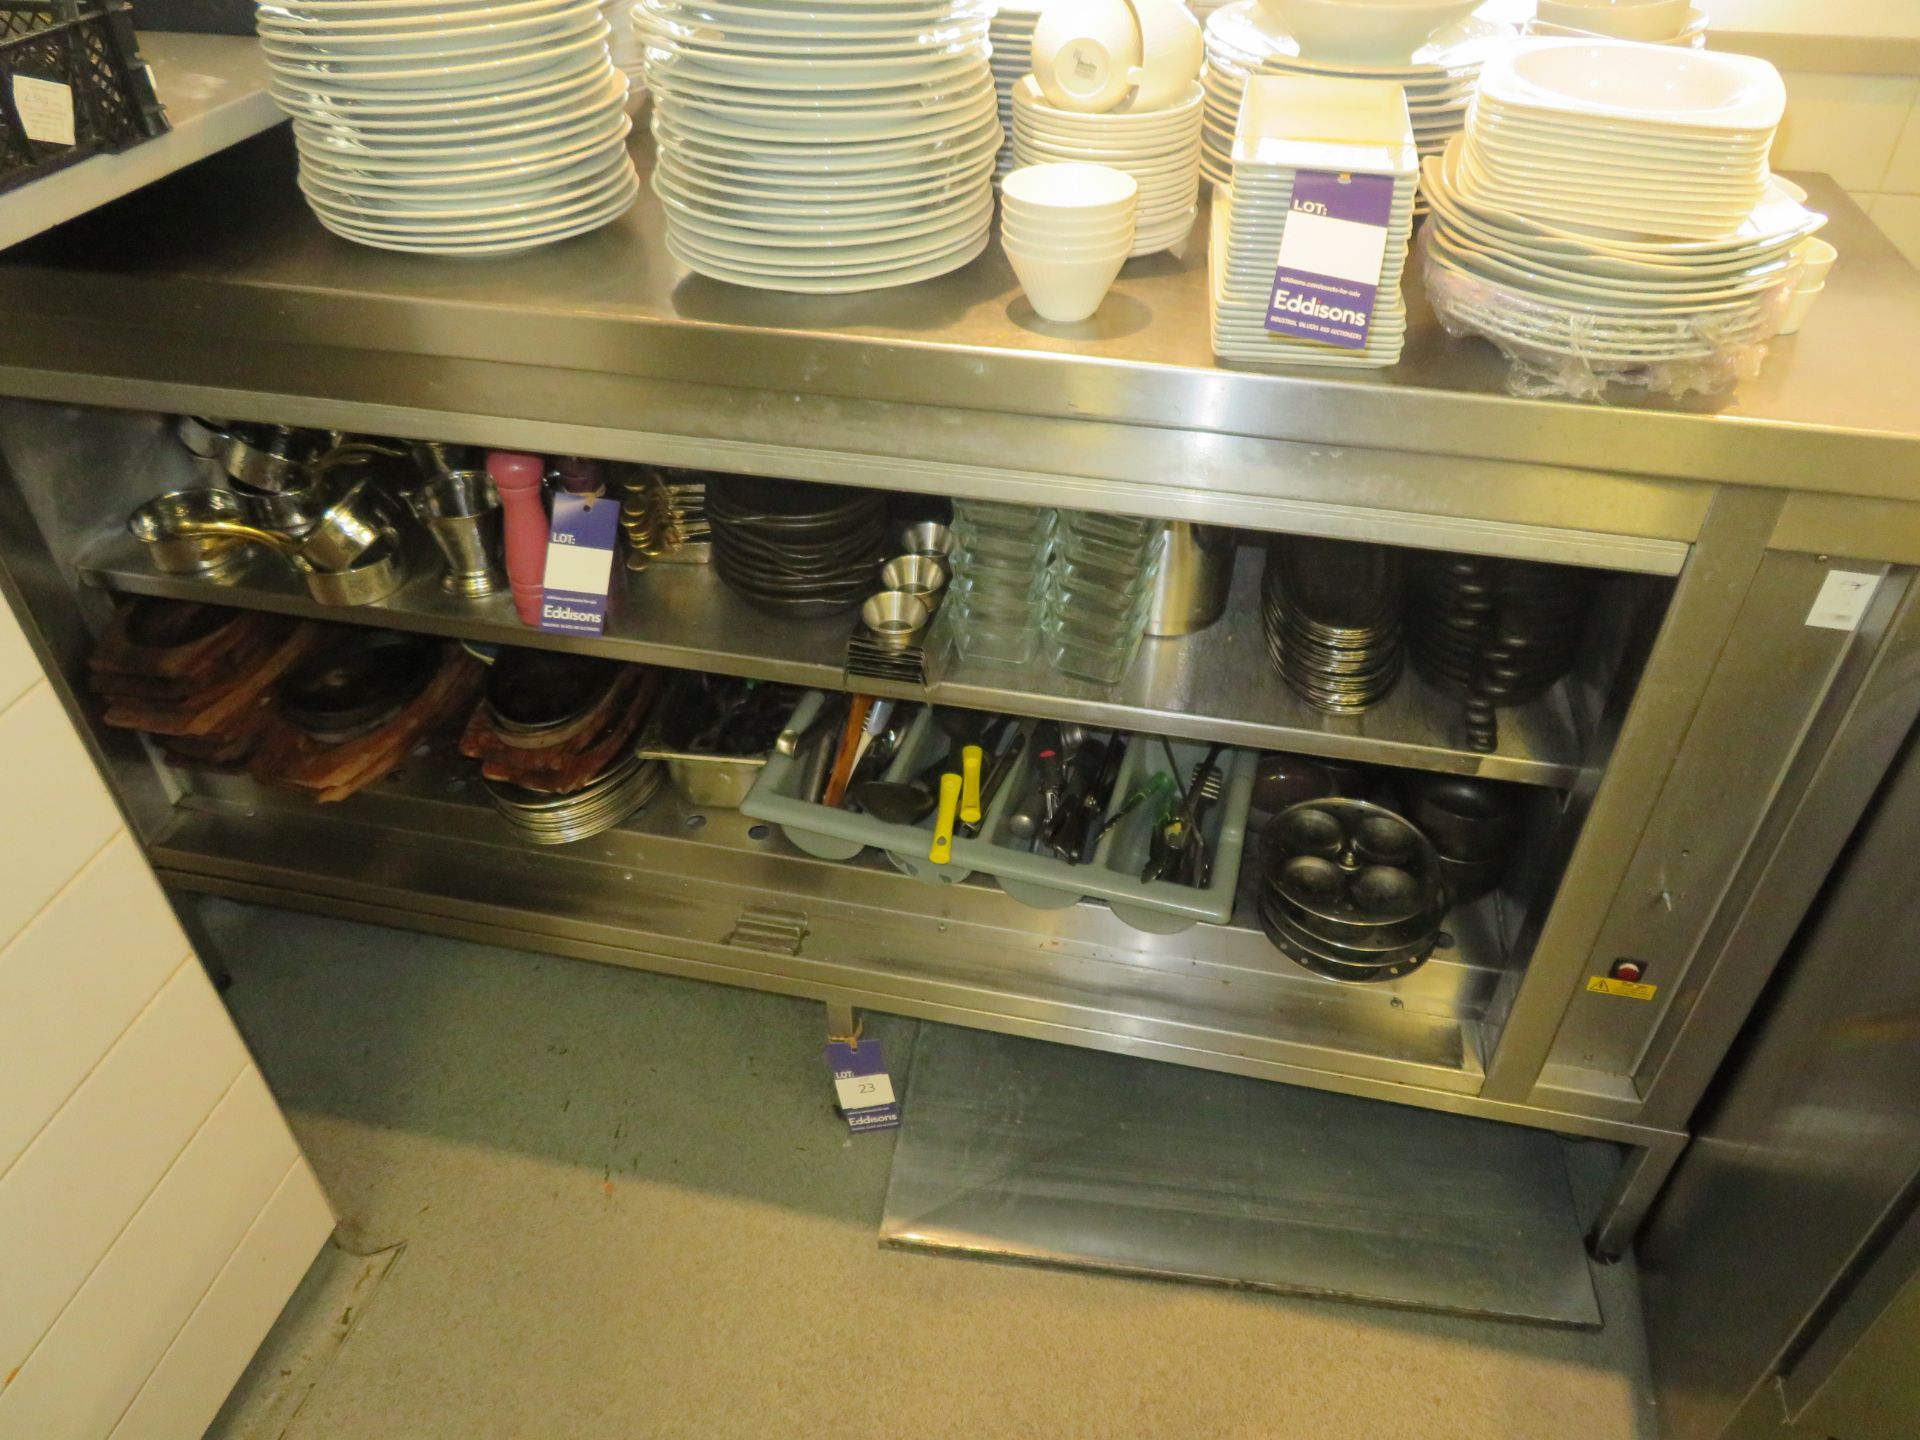 Stainless Steel Heated Prep Table (Spares or Repair - One Door and Control knobs are missing) 1800 x